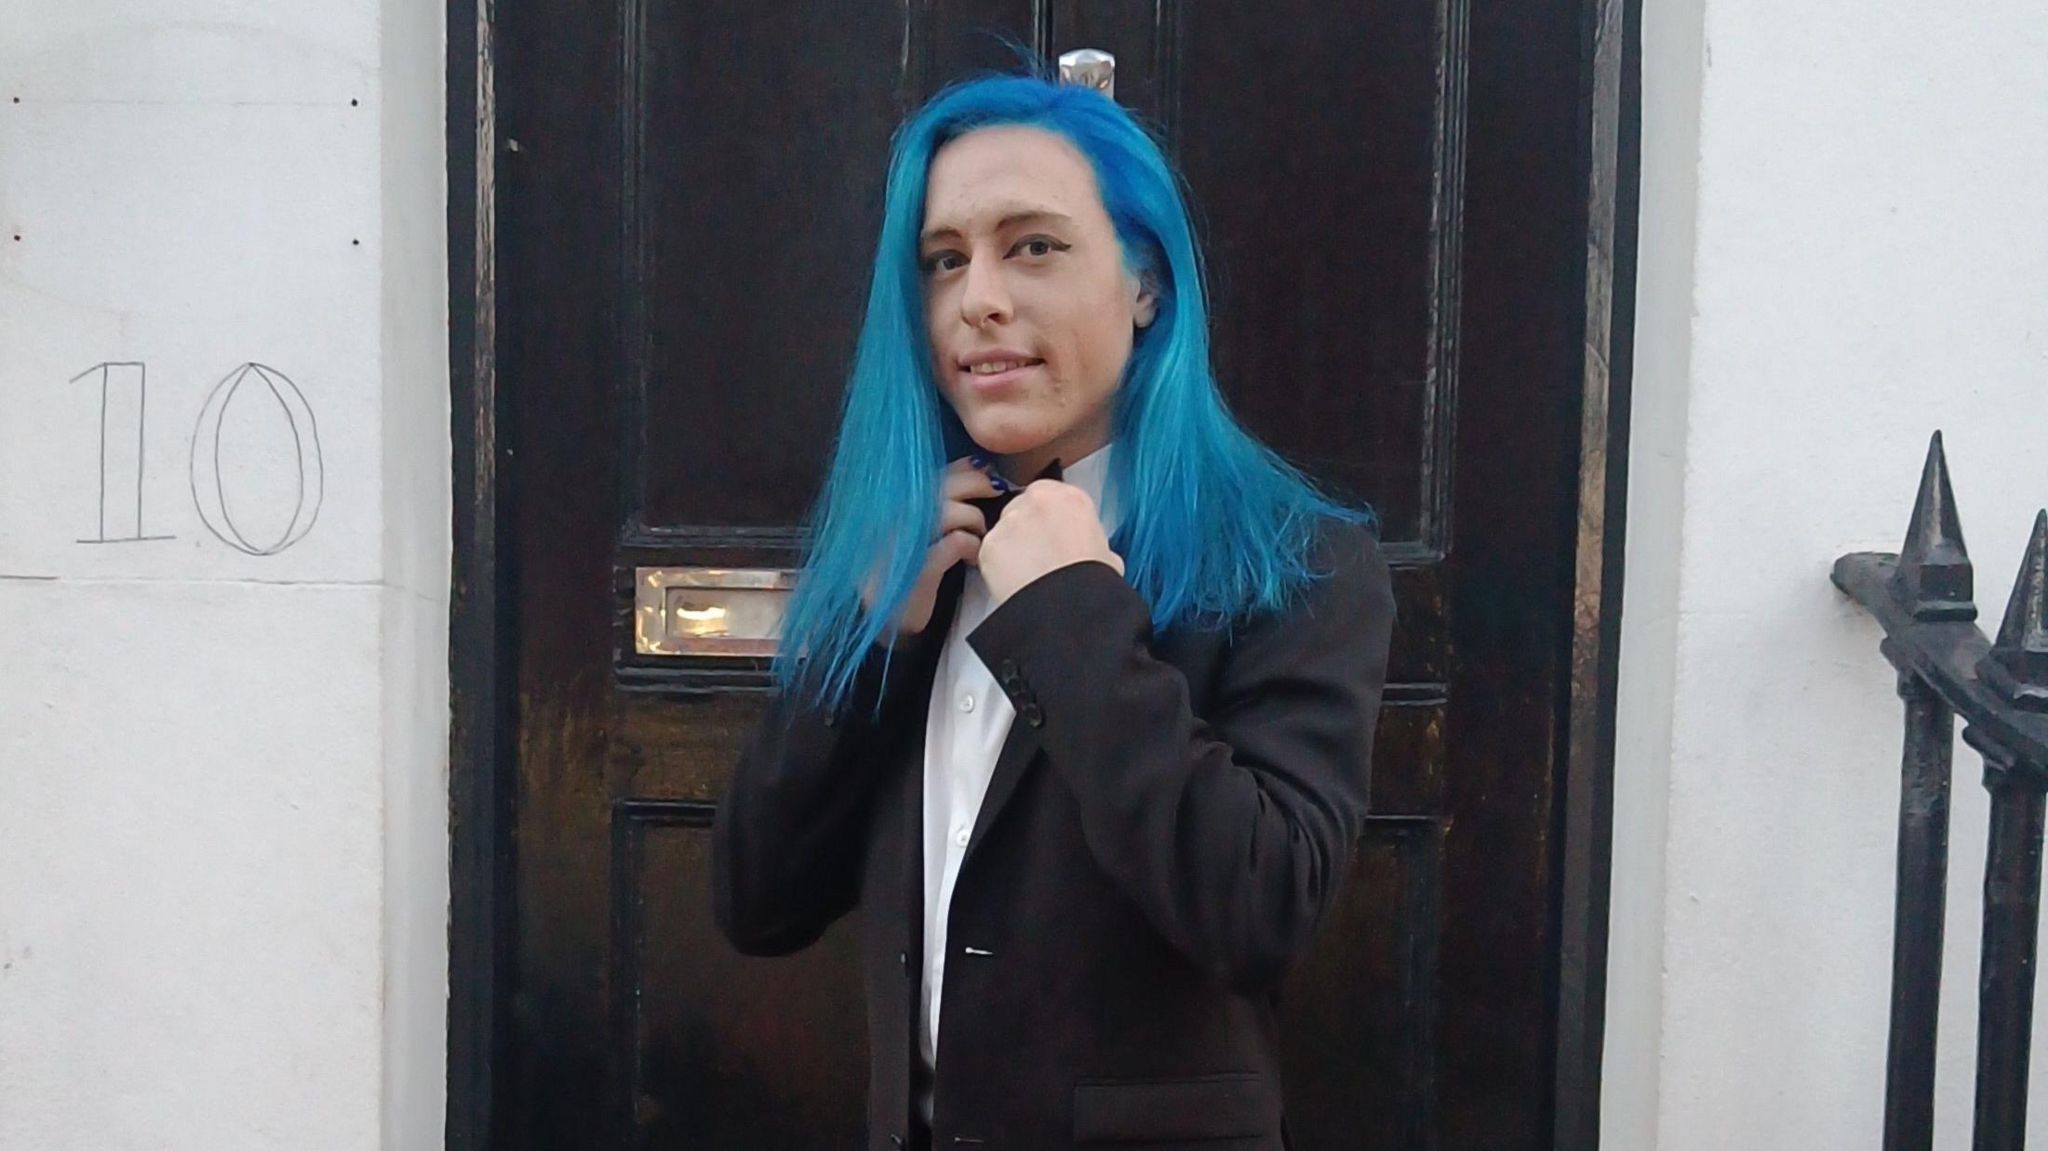 Aqua has blue hair and wears a black suit jacket over a white shirt